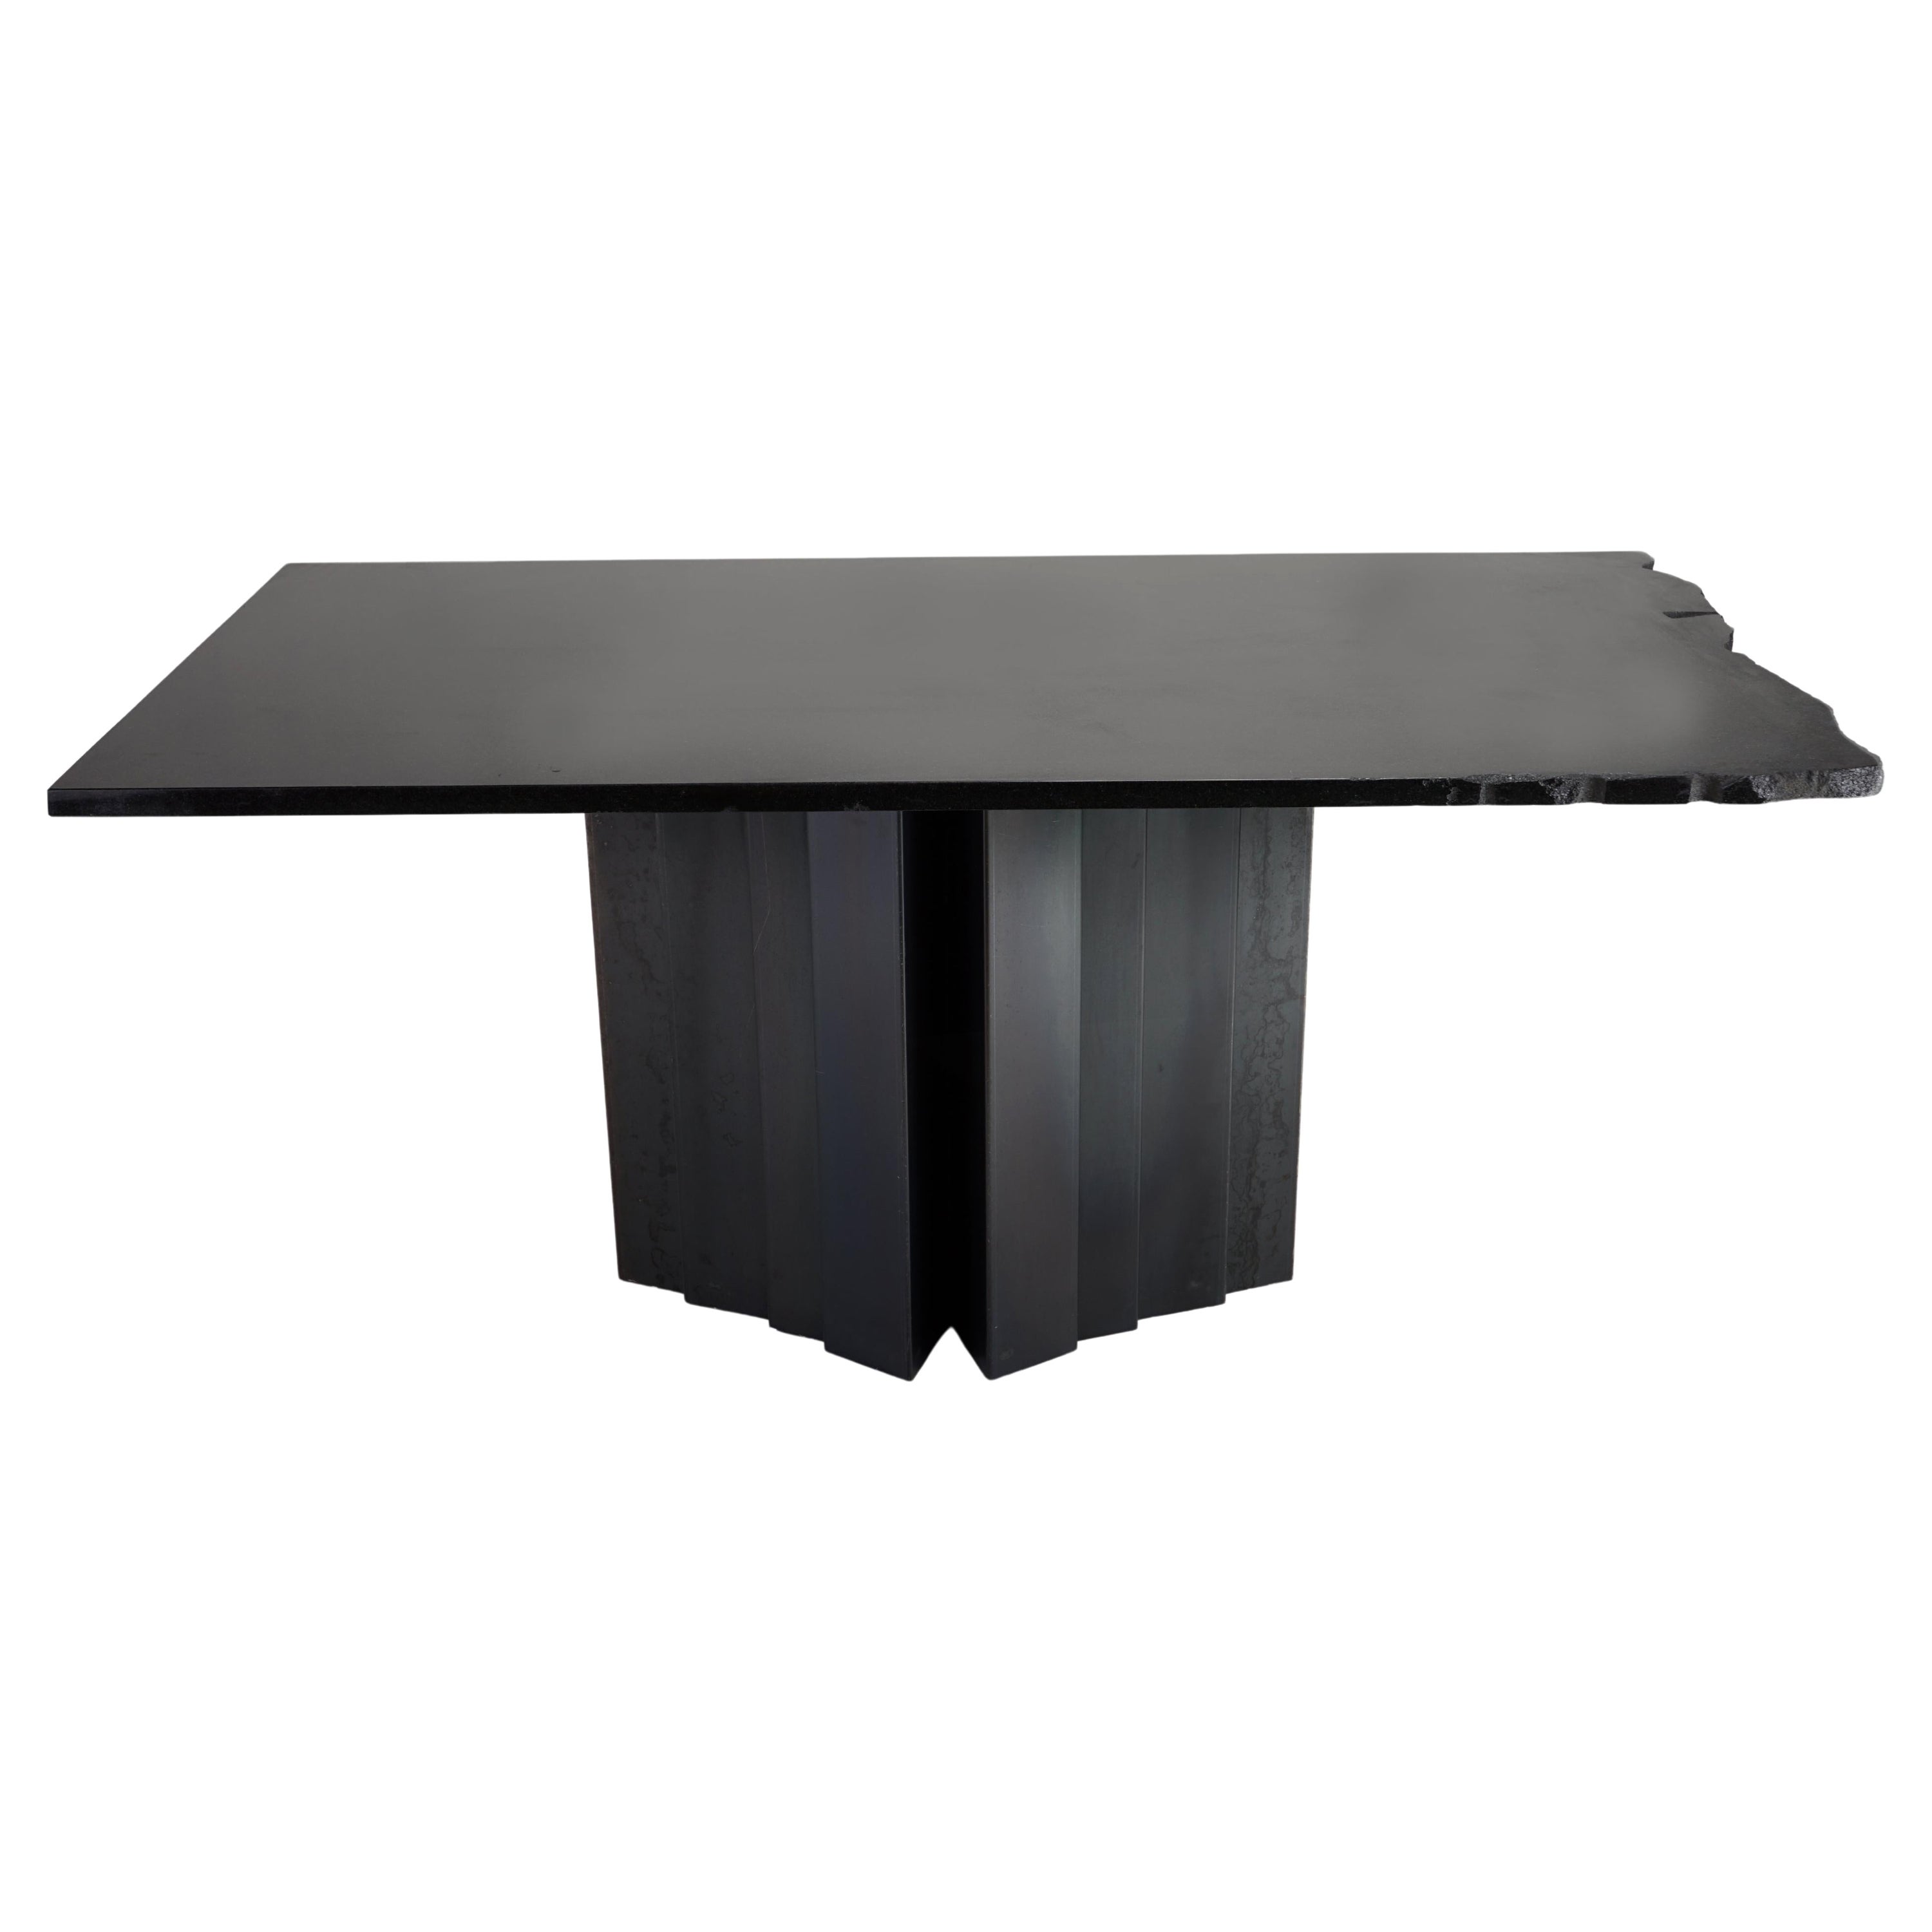 Materico, Absolute Black Granite Dining Table by Dfdesignlab Handmade in Italy For Sale